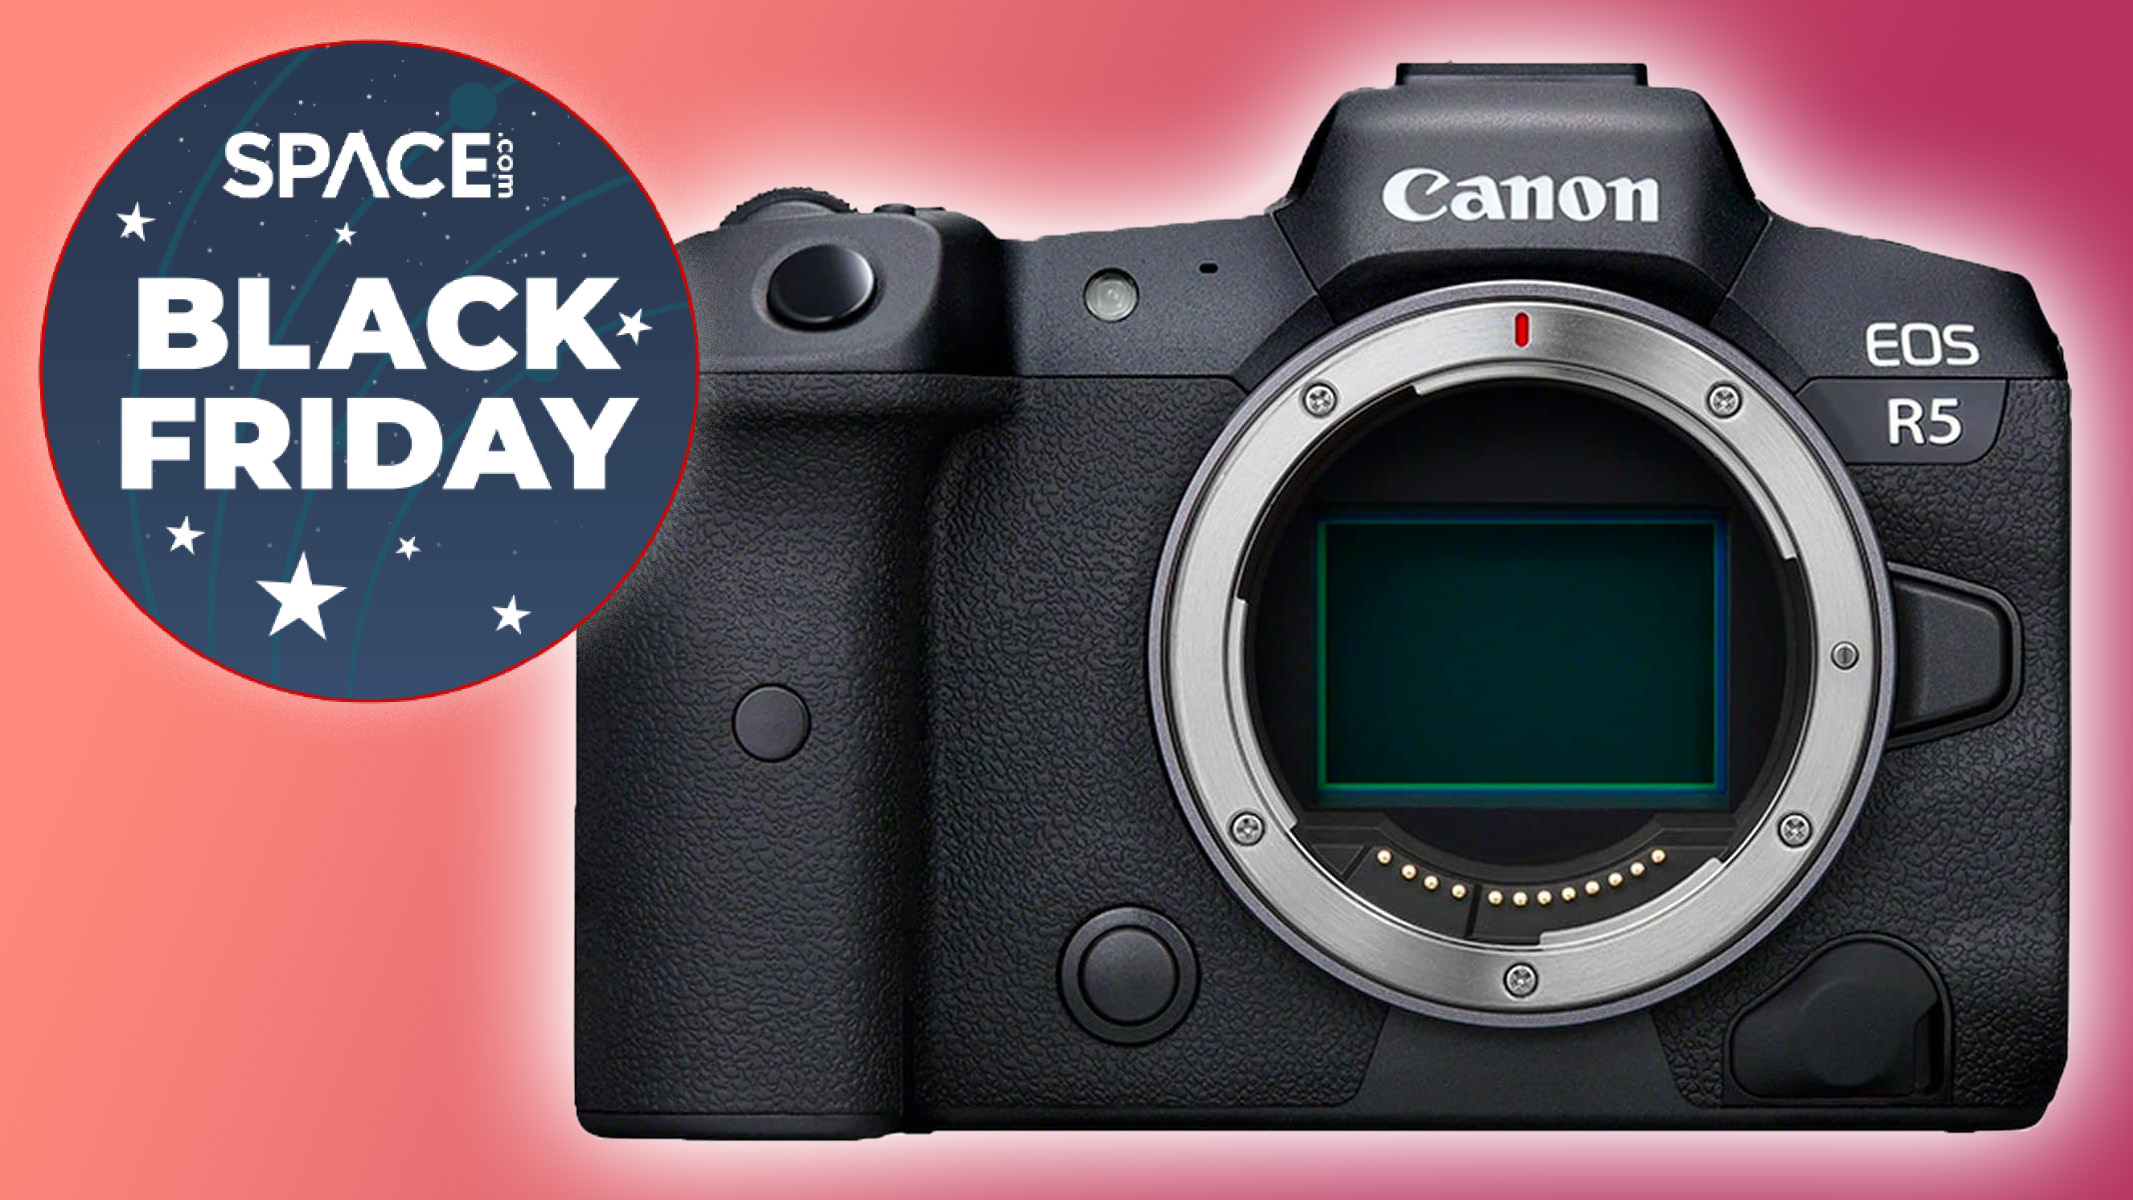 Further Black Friday price drop! Save $900 on Canon EOS R5 Space